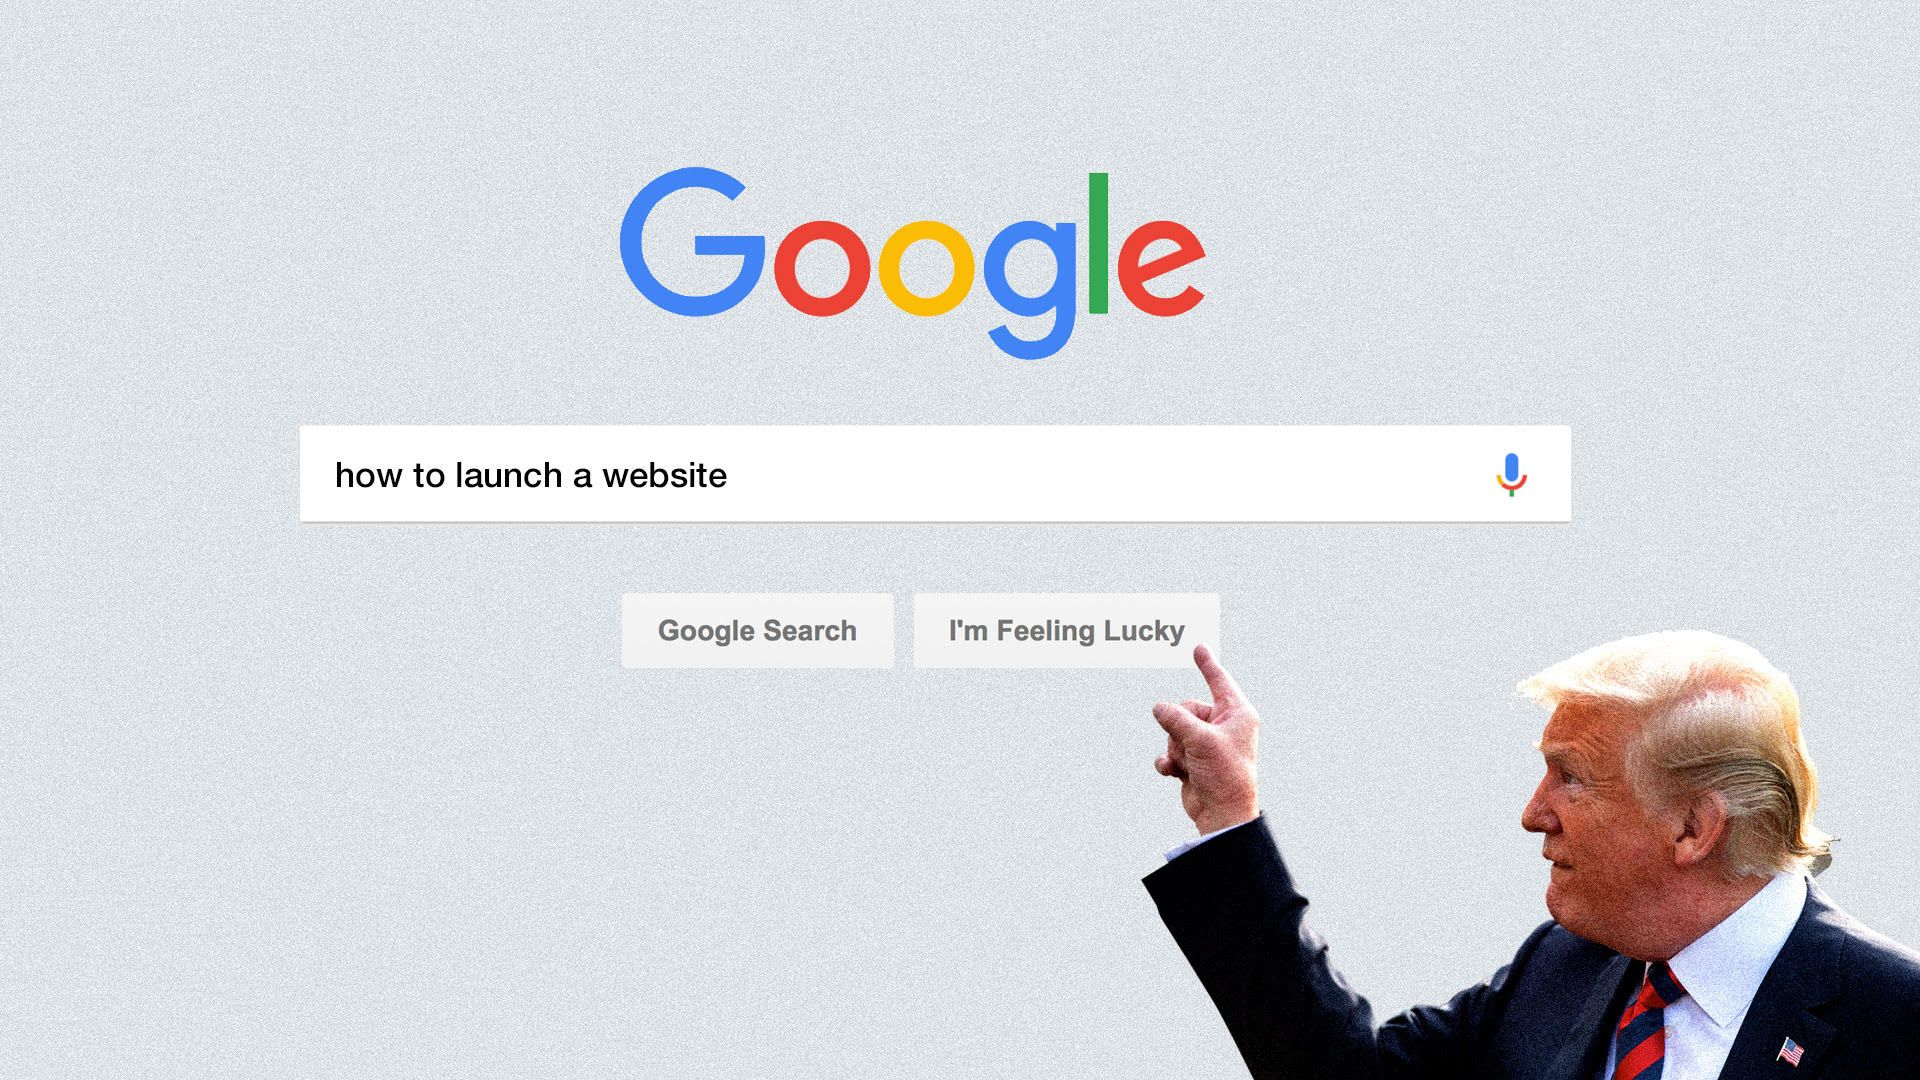 Illustration of Google search bar with “How to launch a website” and Trump pointing to button.